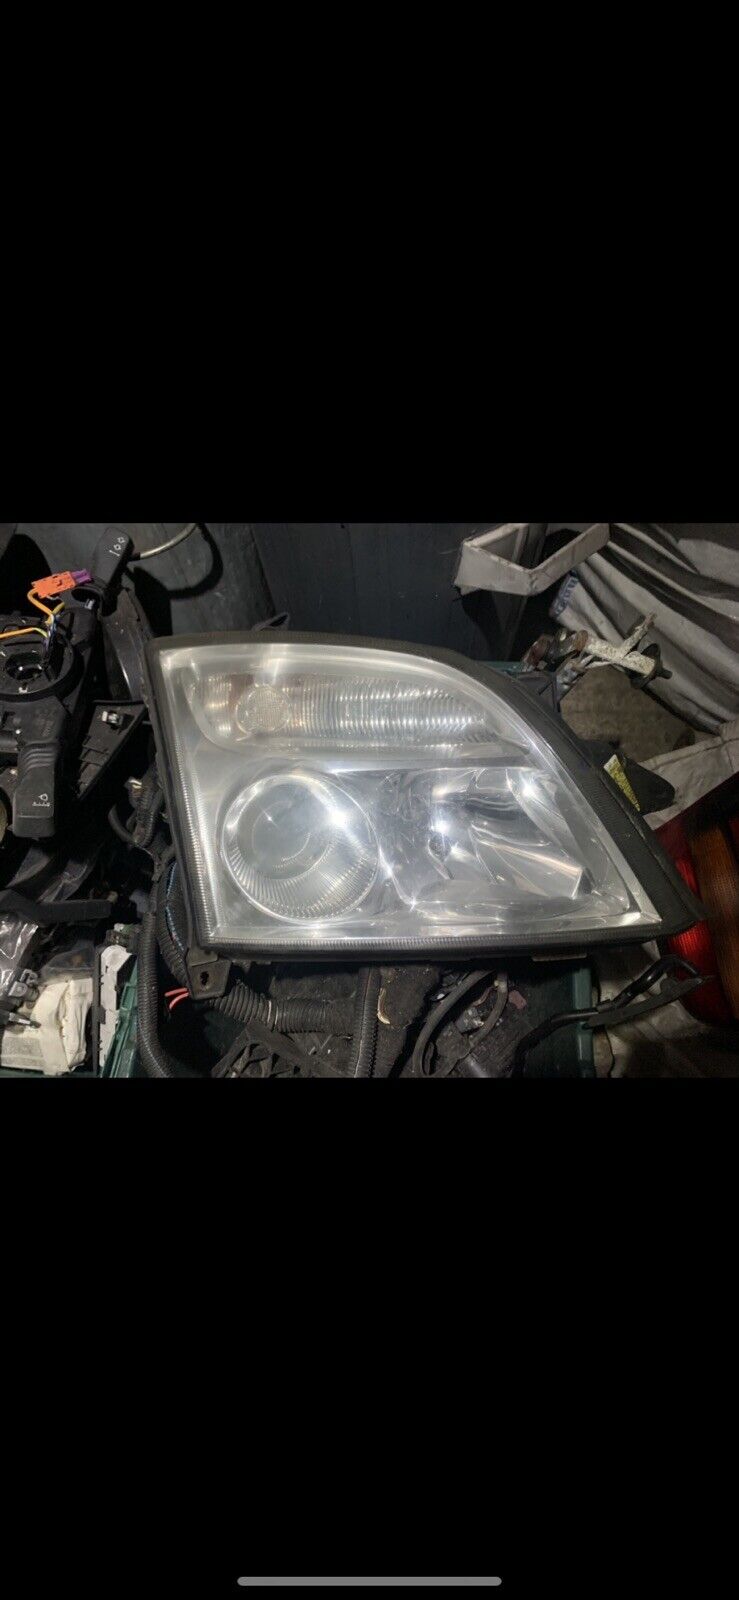 VAUXHALL VECTRA C DRIVERS SIDE HEADLIGHT 2002 UP TO 2005 PRE FACE LIFT